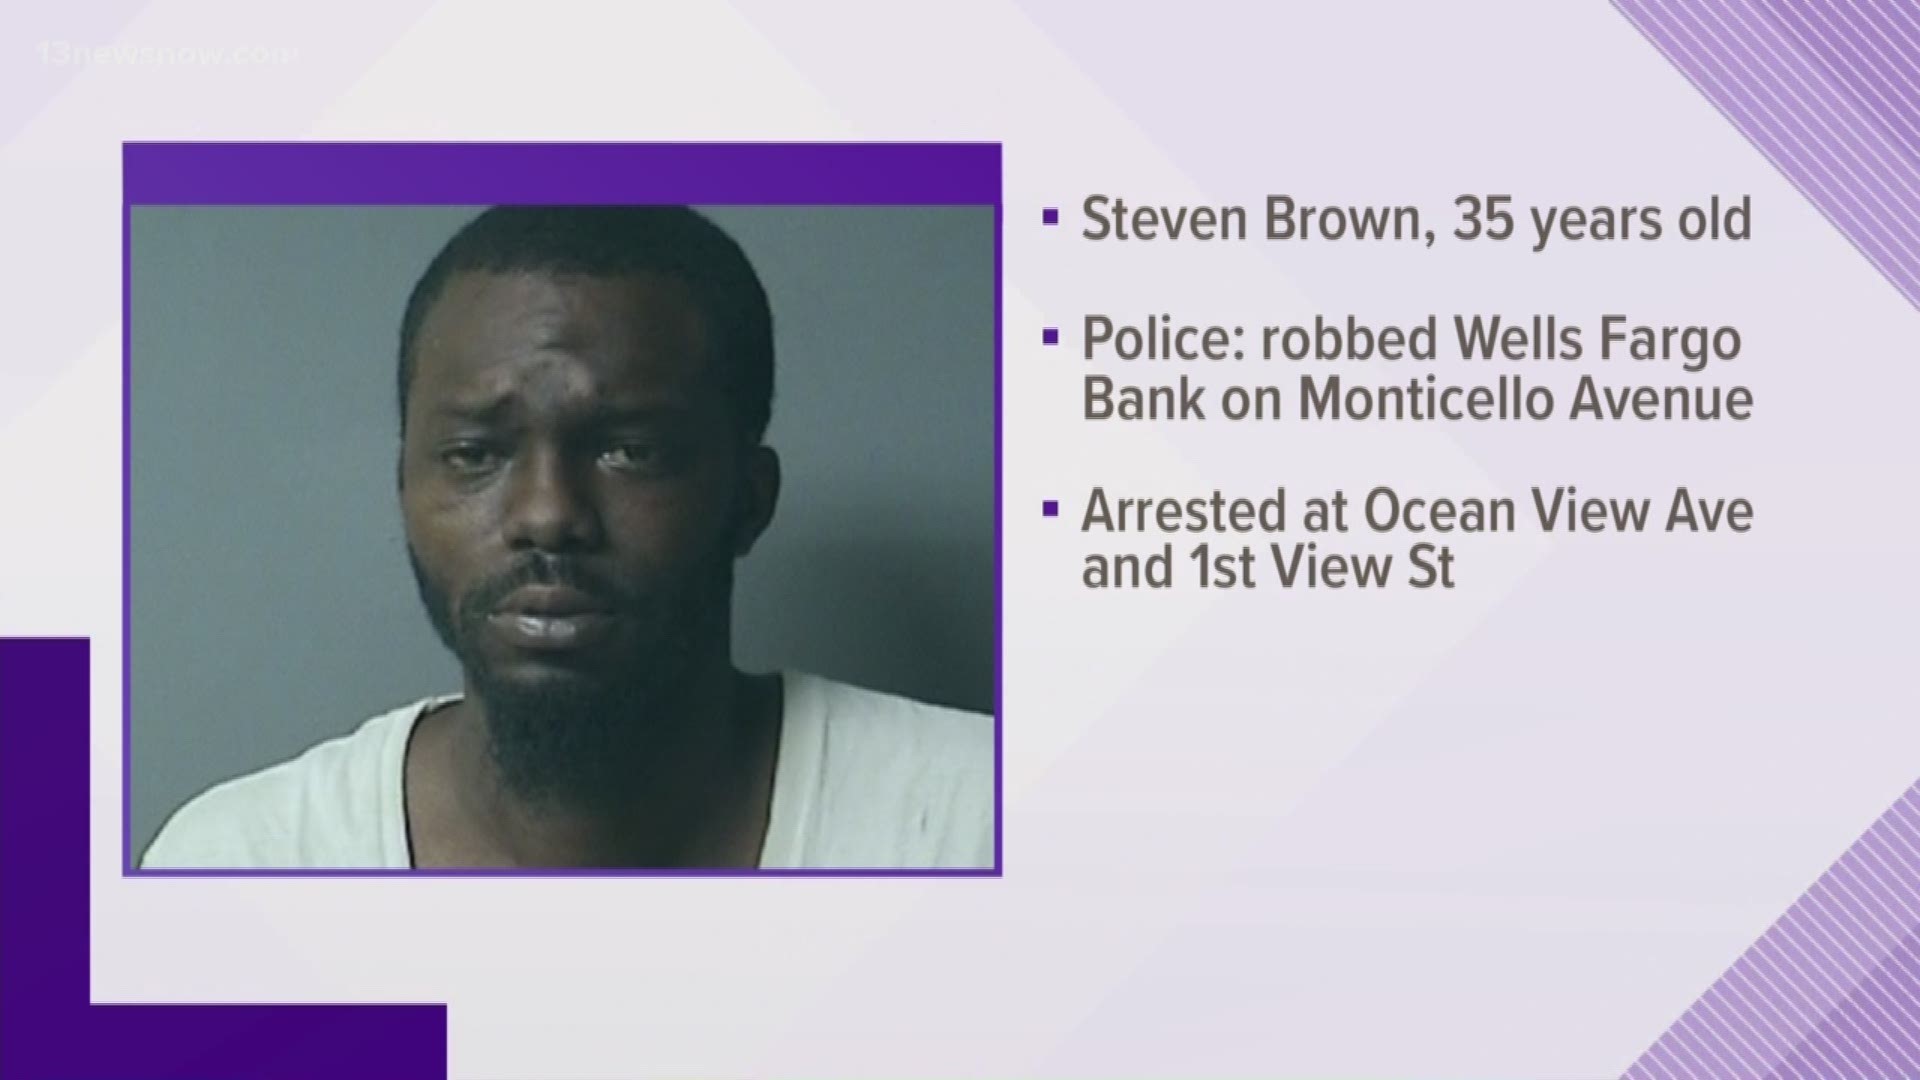 Steven Brown, 35, was arrested for the robbery of the Wells Fargo Bank on Monticello Avenue. He was arrested Monday at Ocean View Avenue and 1st View Avenue.